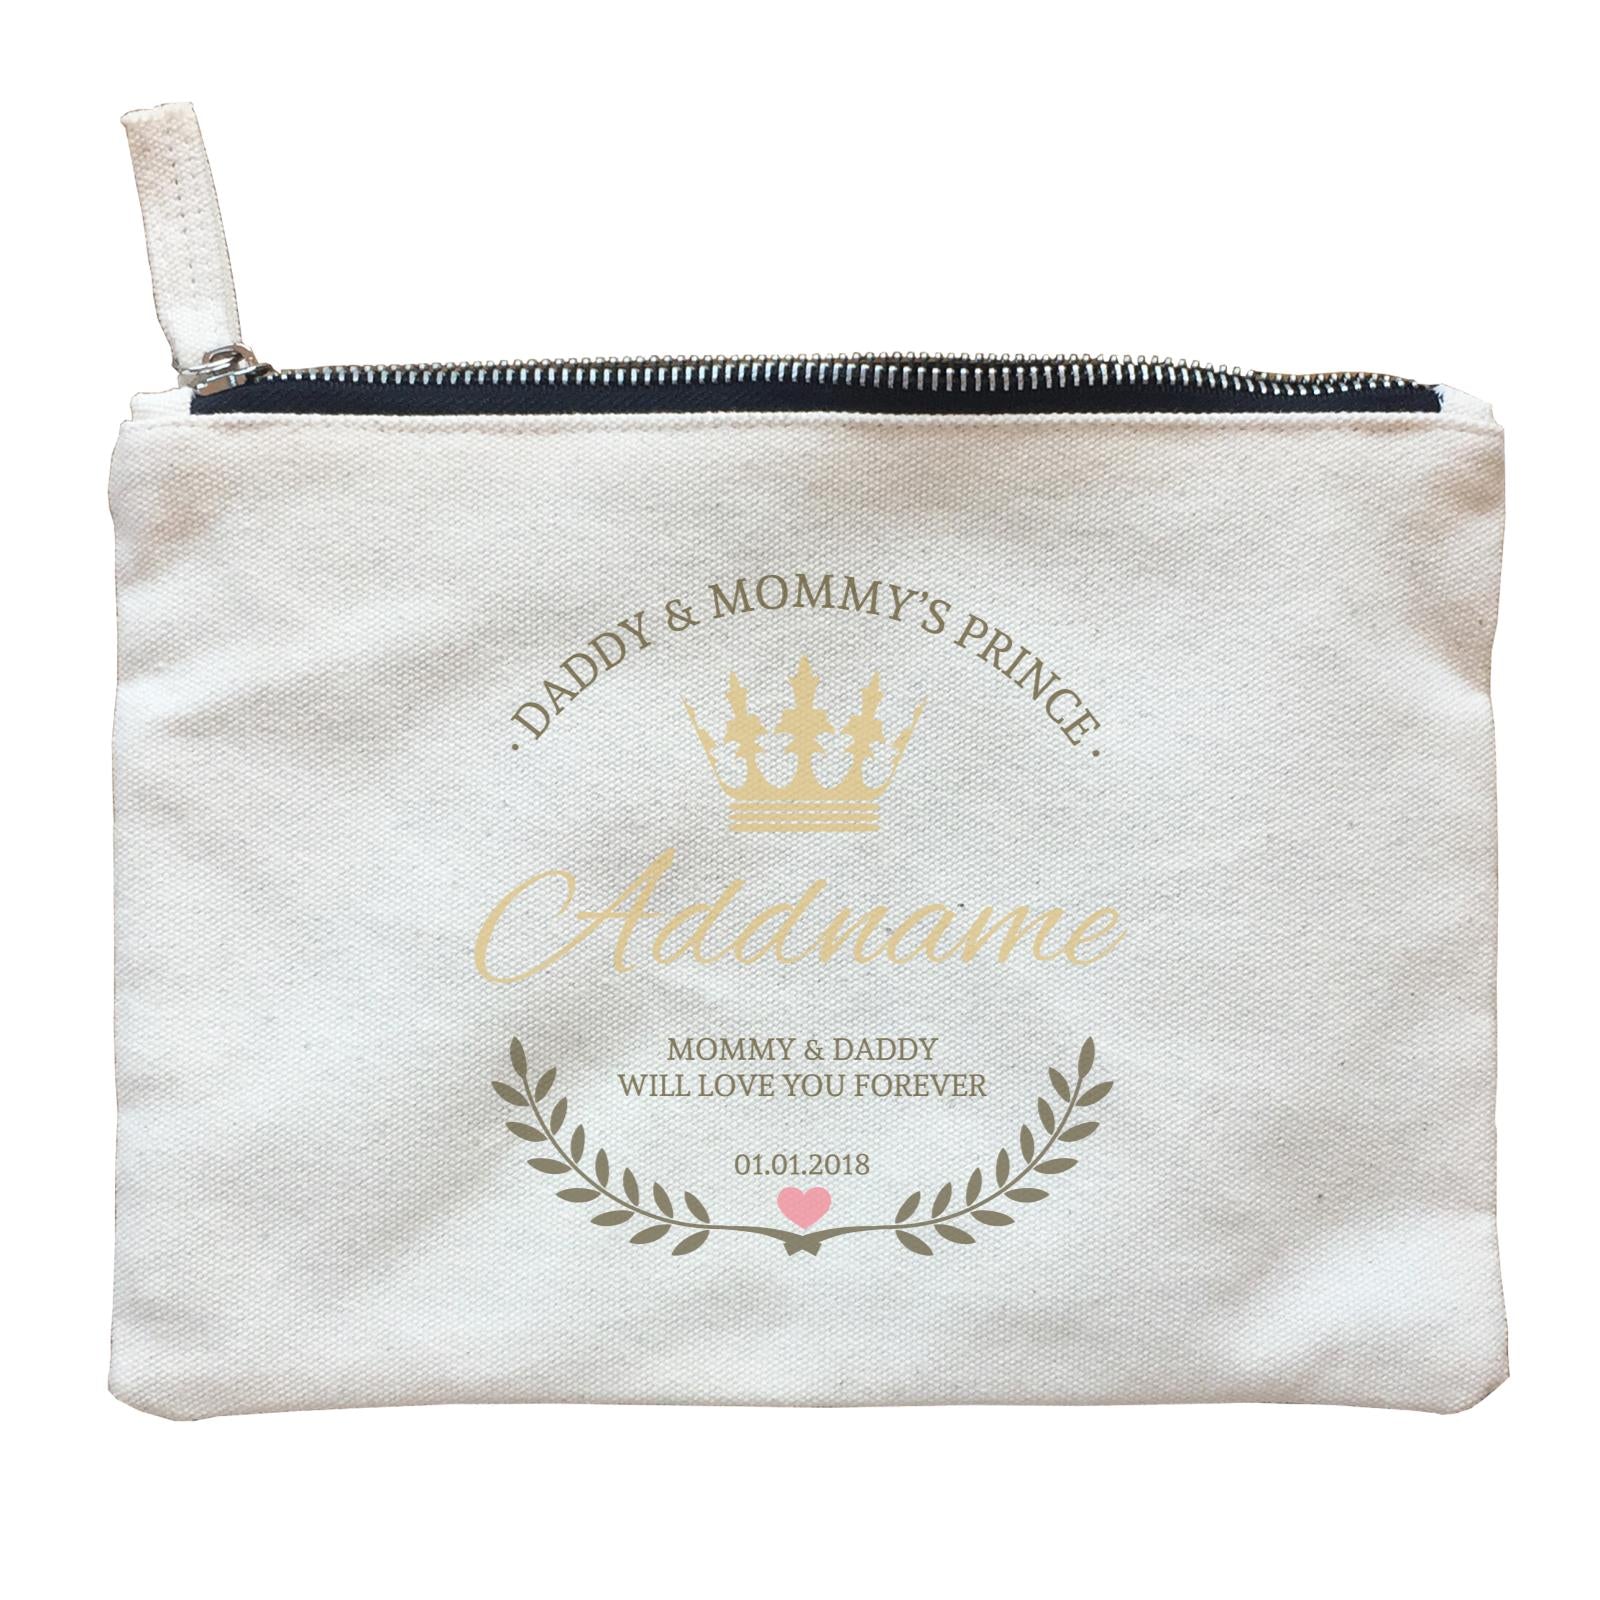 Daddy and Mommy's Prince with Crown Wreath Personalizable with Name Text and Date Zipper Pouch